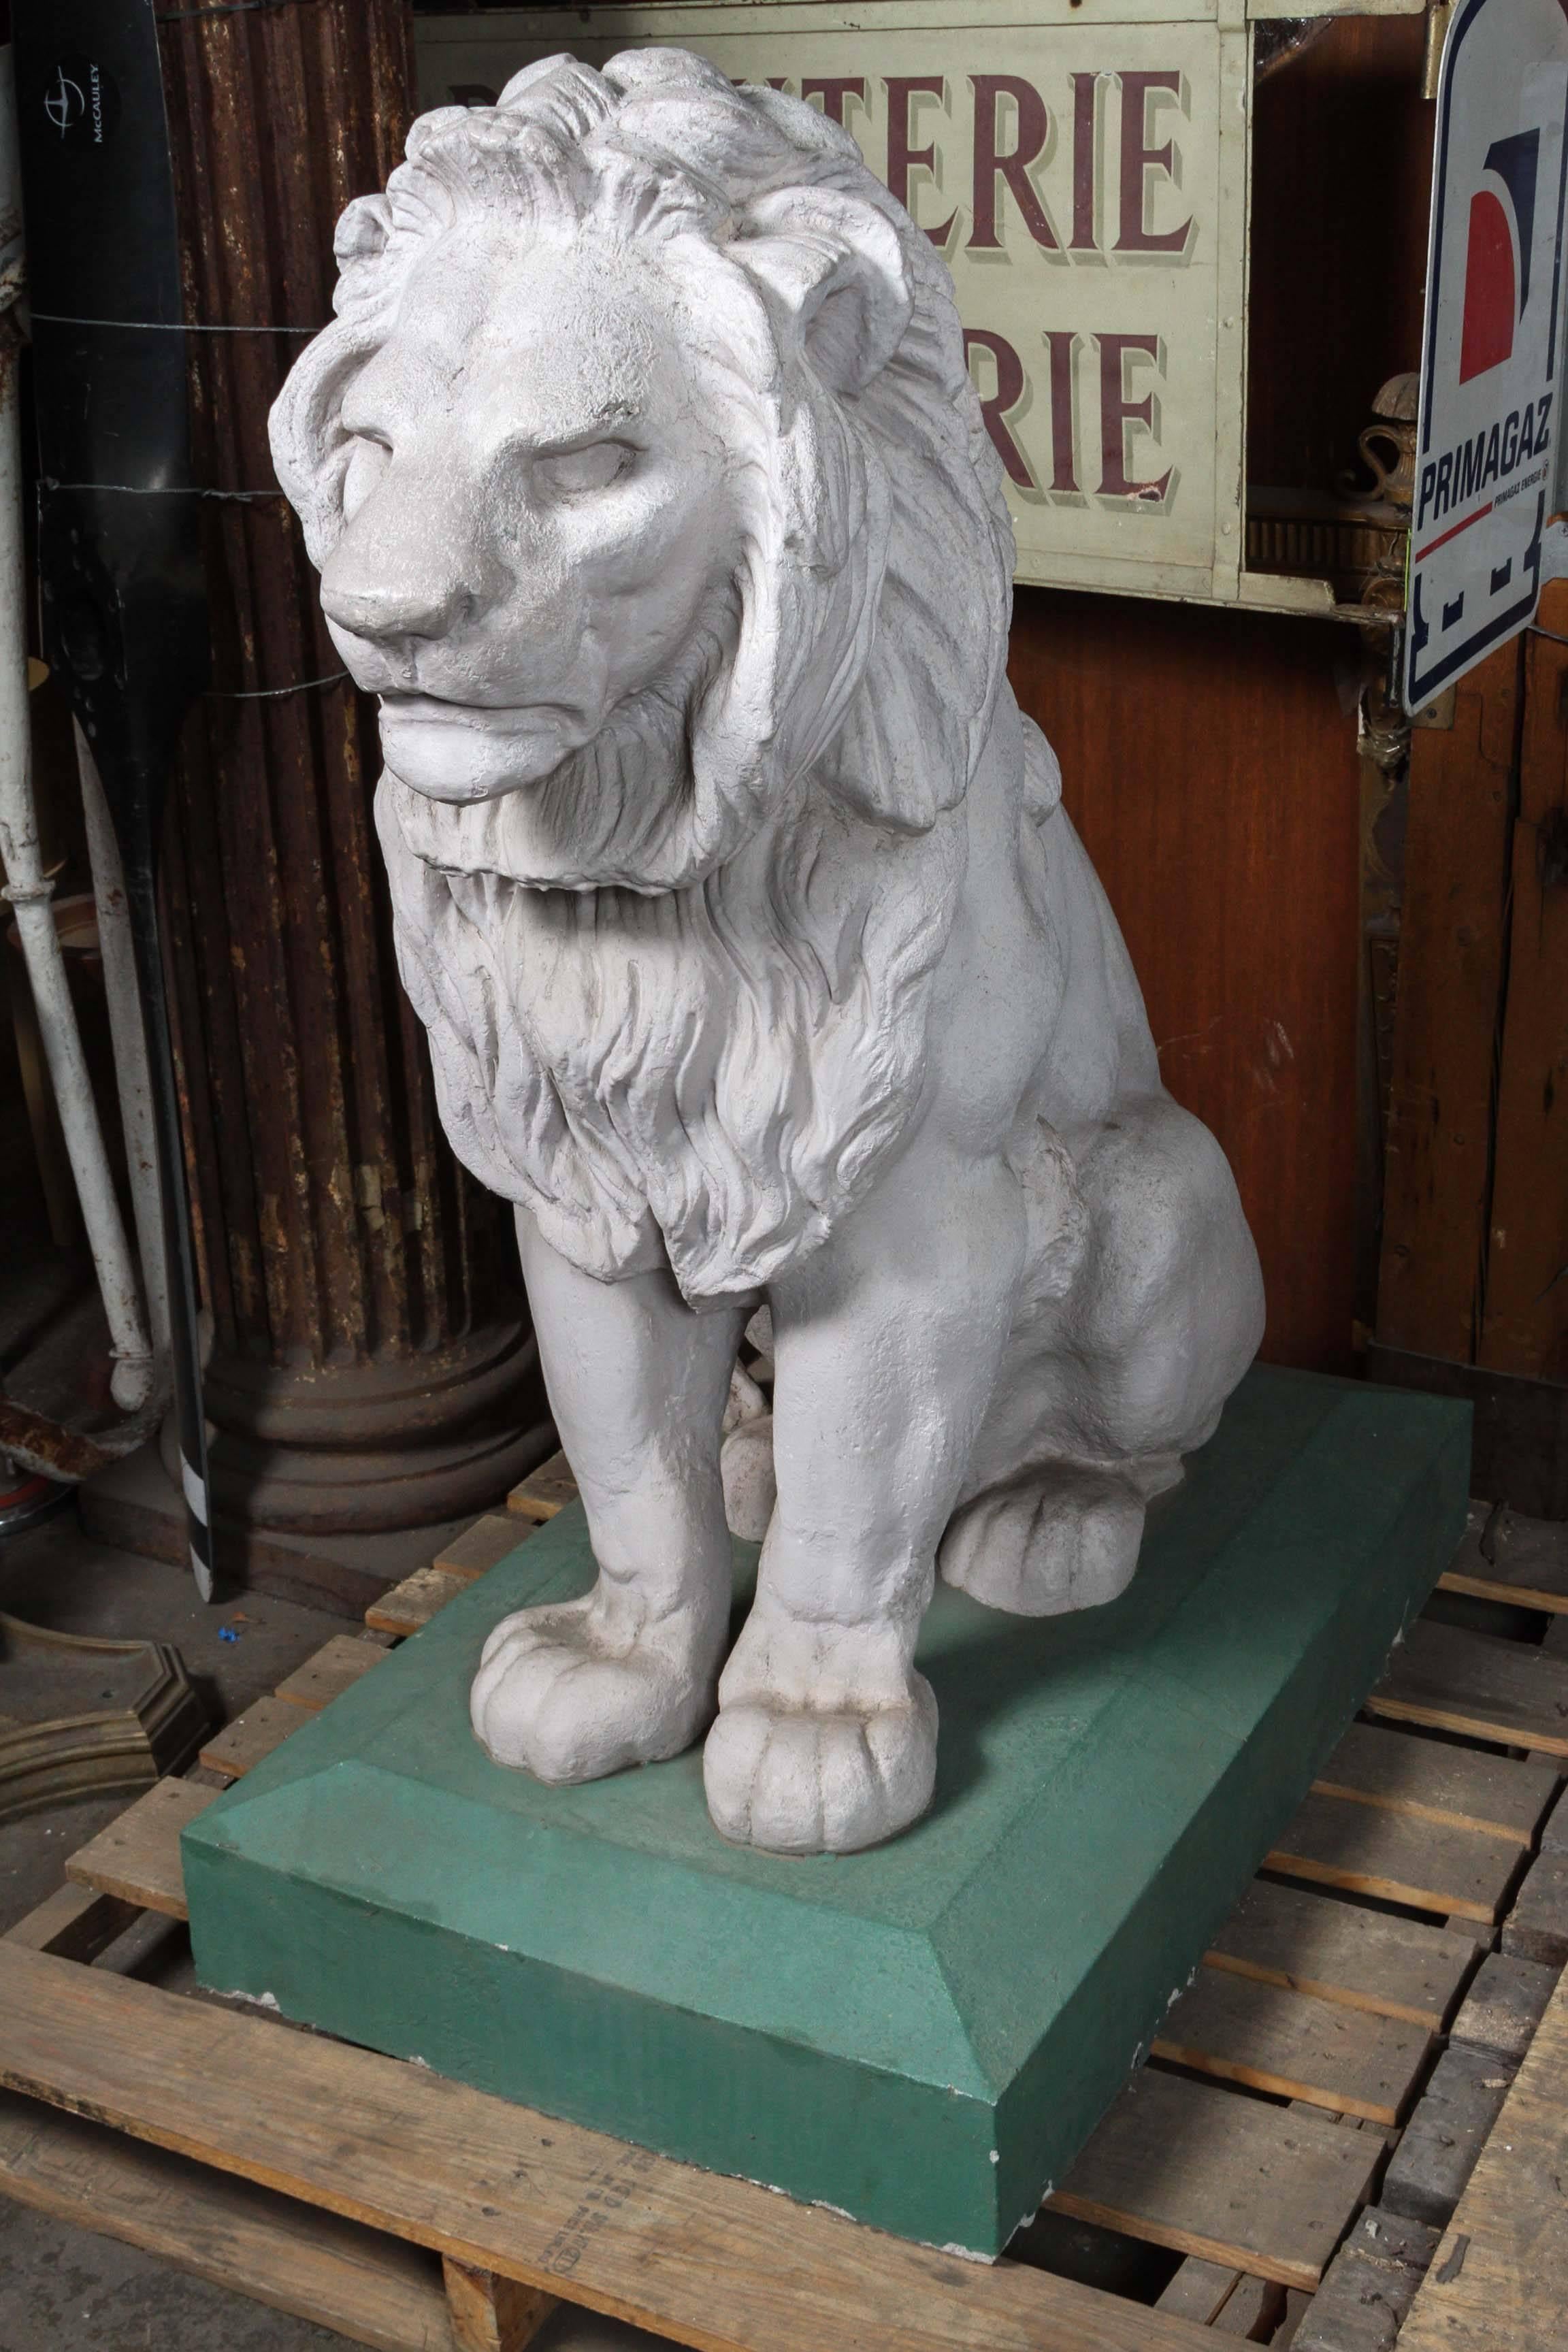 1927 pair of lions from a Bel Air Italian Villa. Old quality concrete castings in excellent shape. These can be seen at our 1800 South Grand Ave location in Downtown Los Angeles.